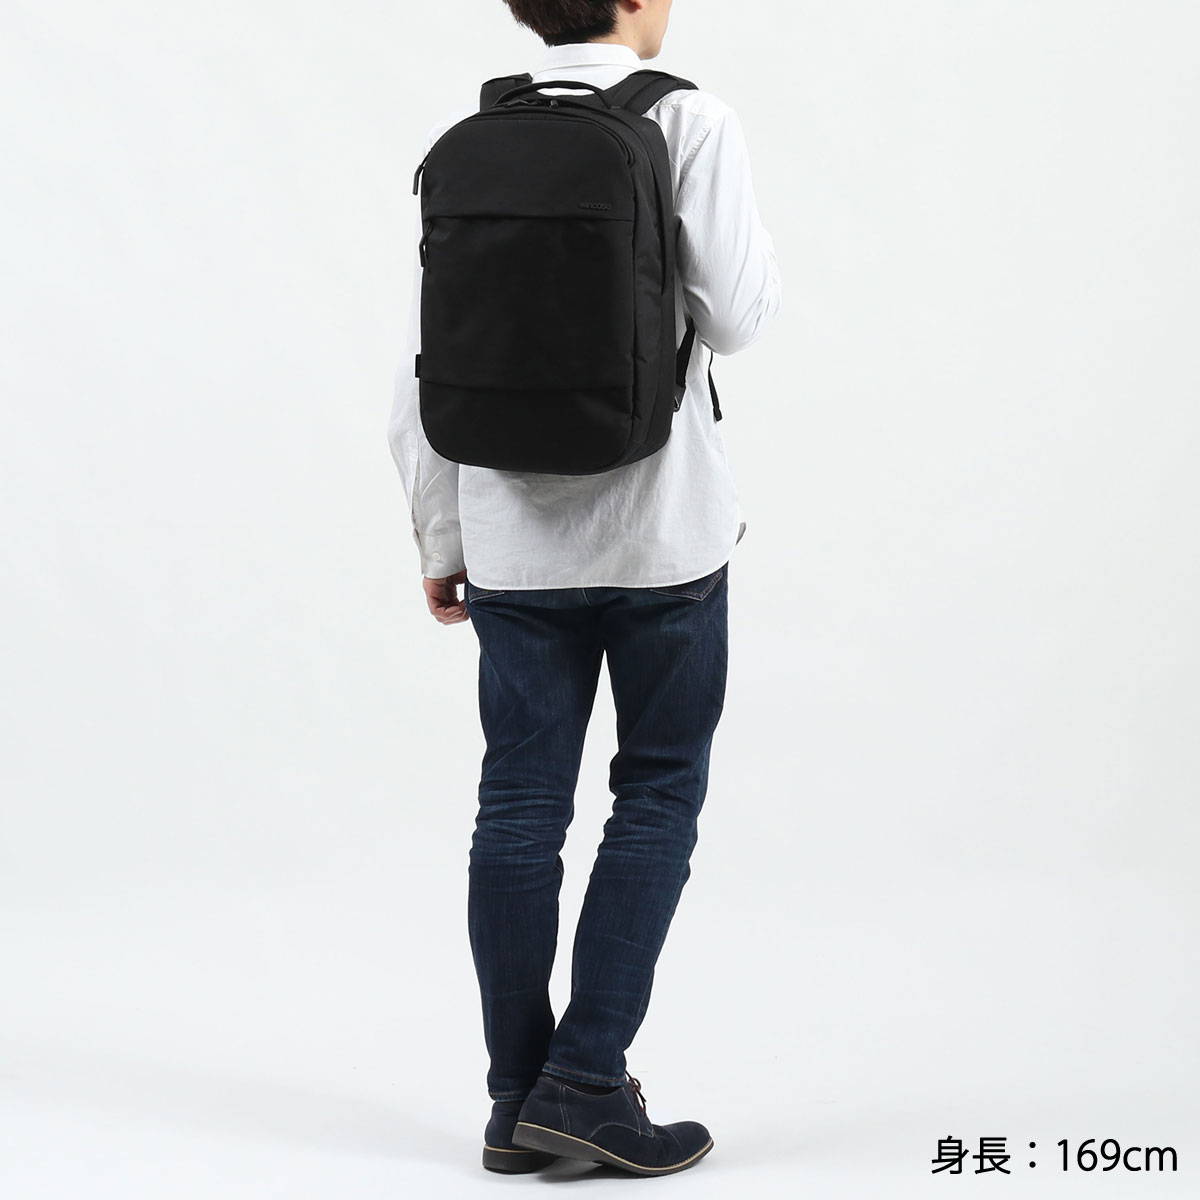 INCASE City Compact Backpack